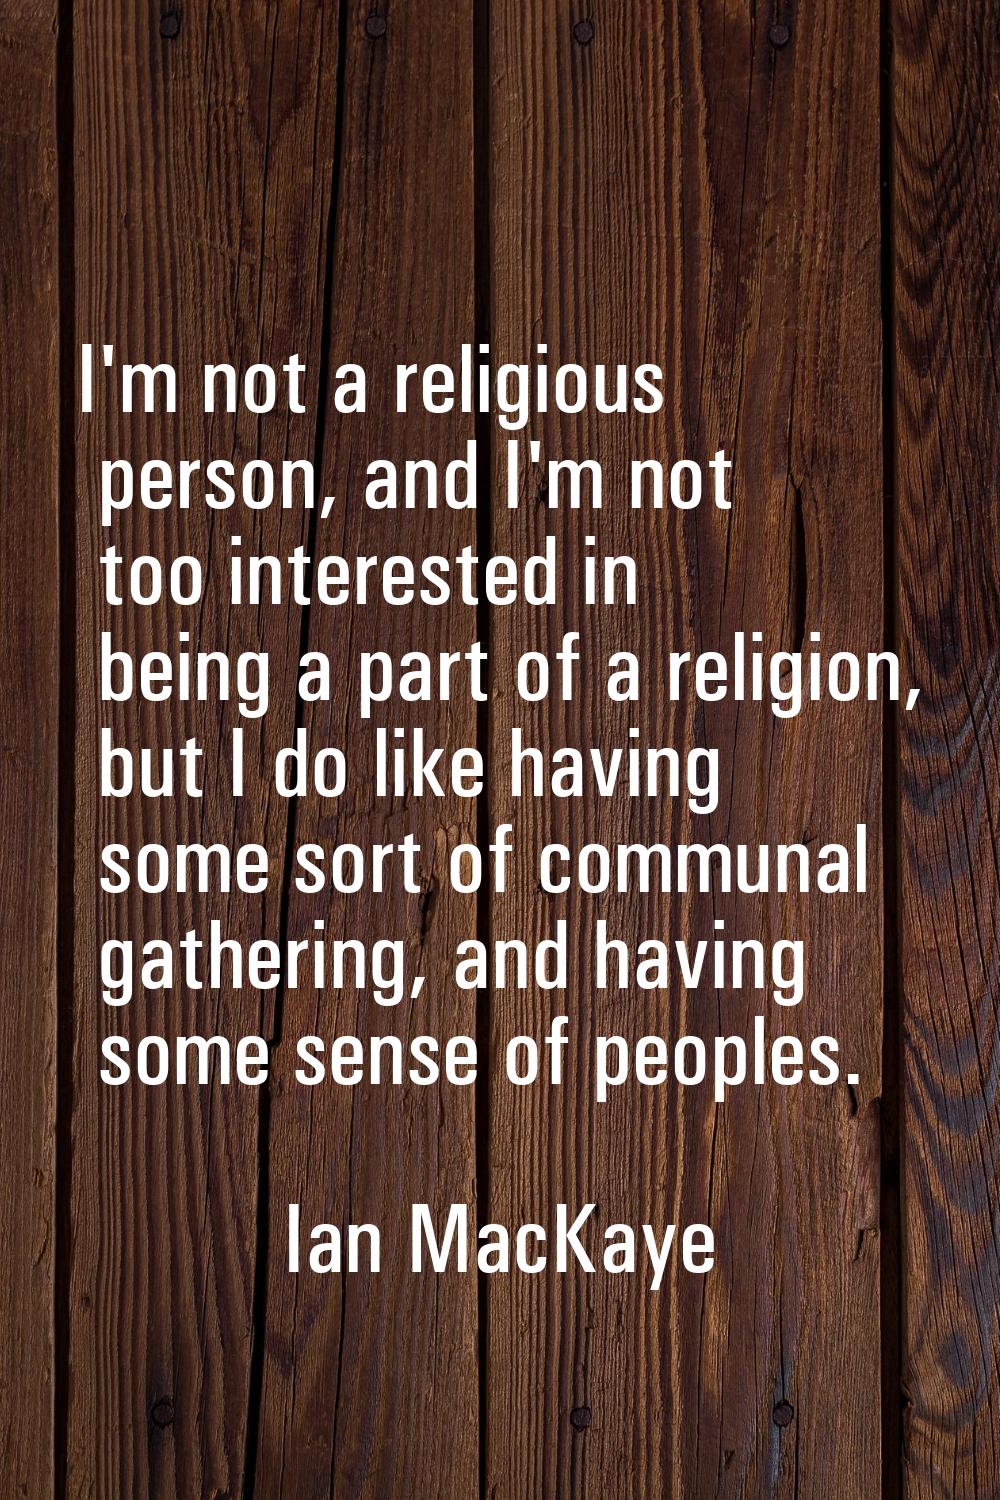 I'm not a religious person, and I'm not too interested in being a part of a religion, but I do like